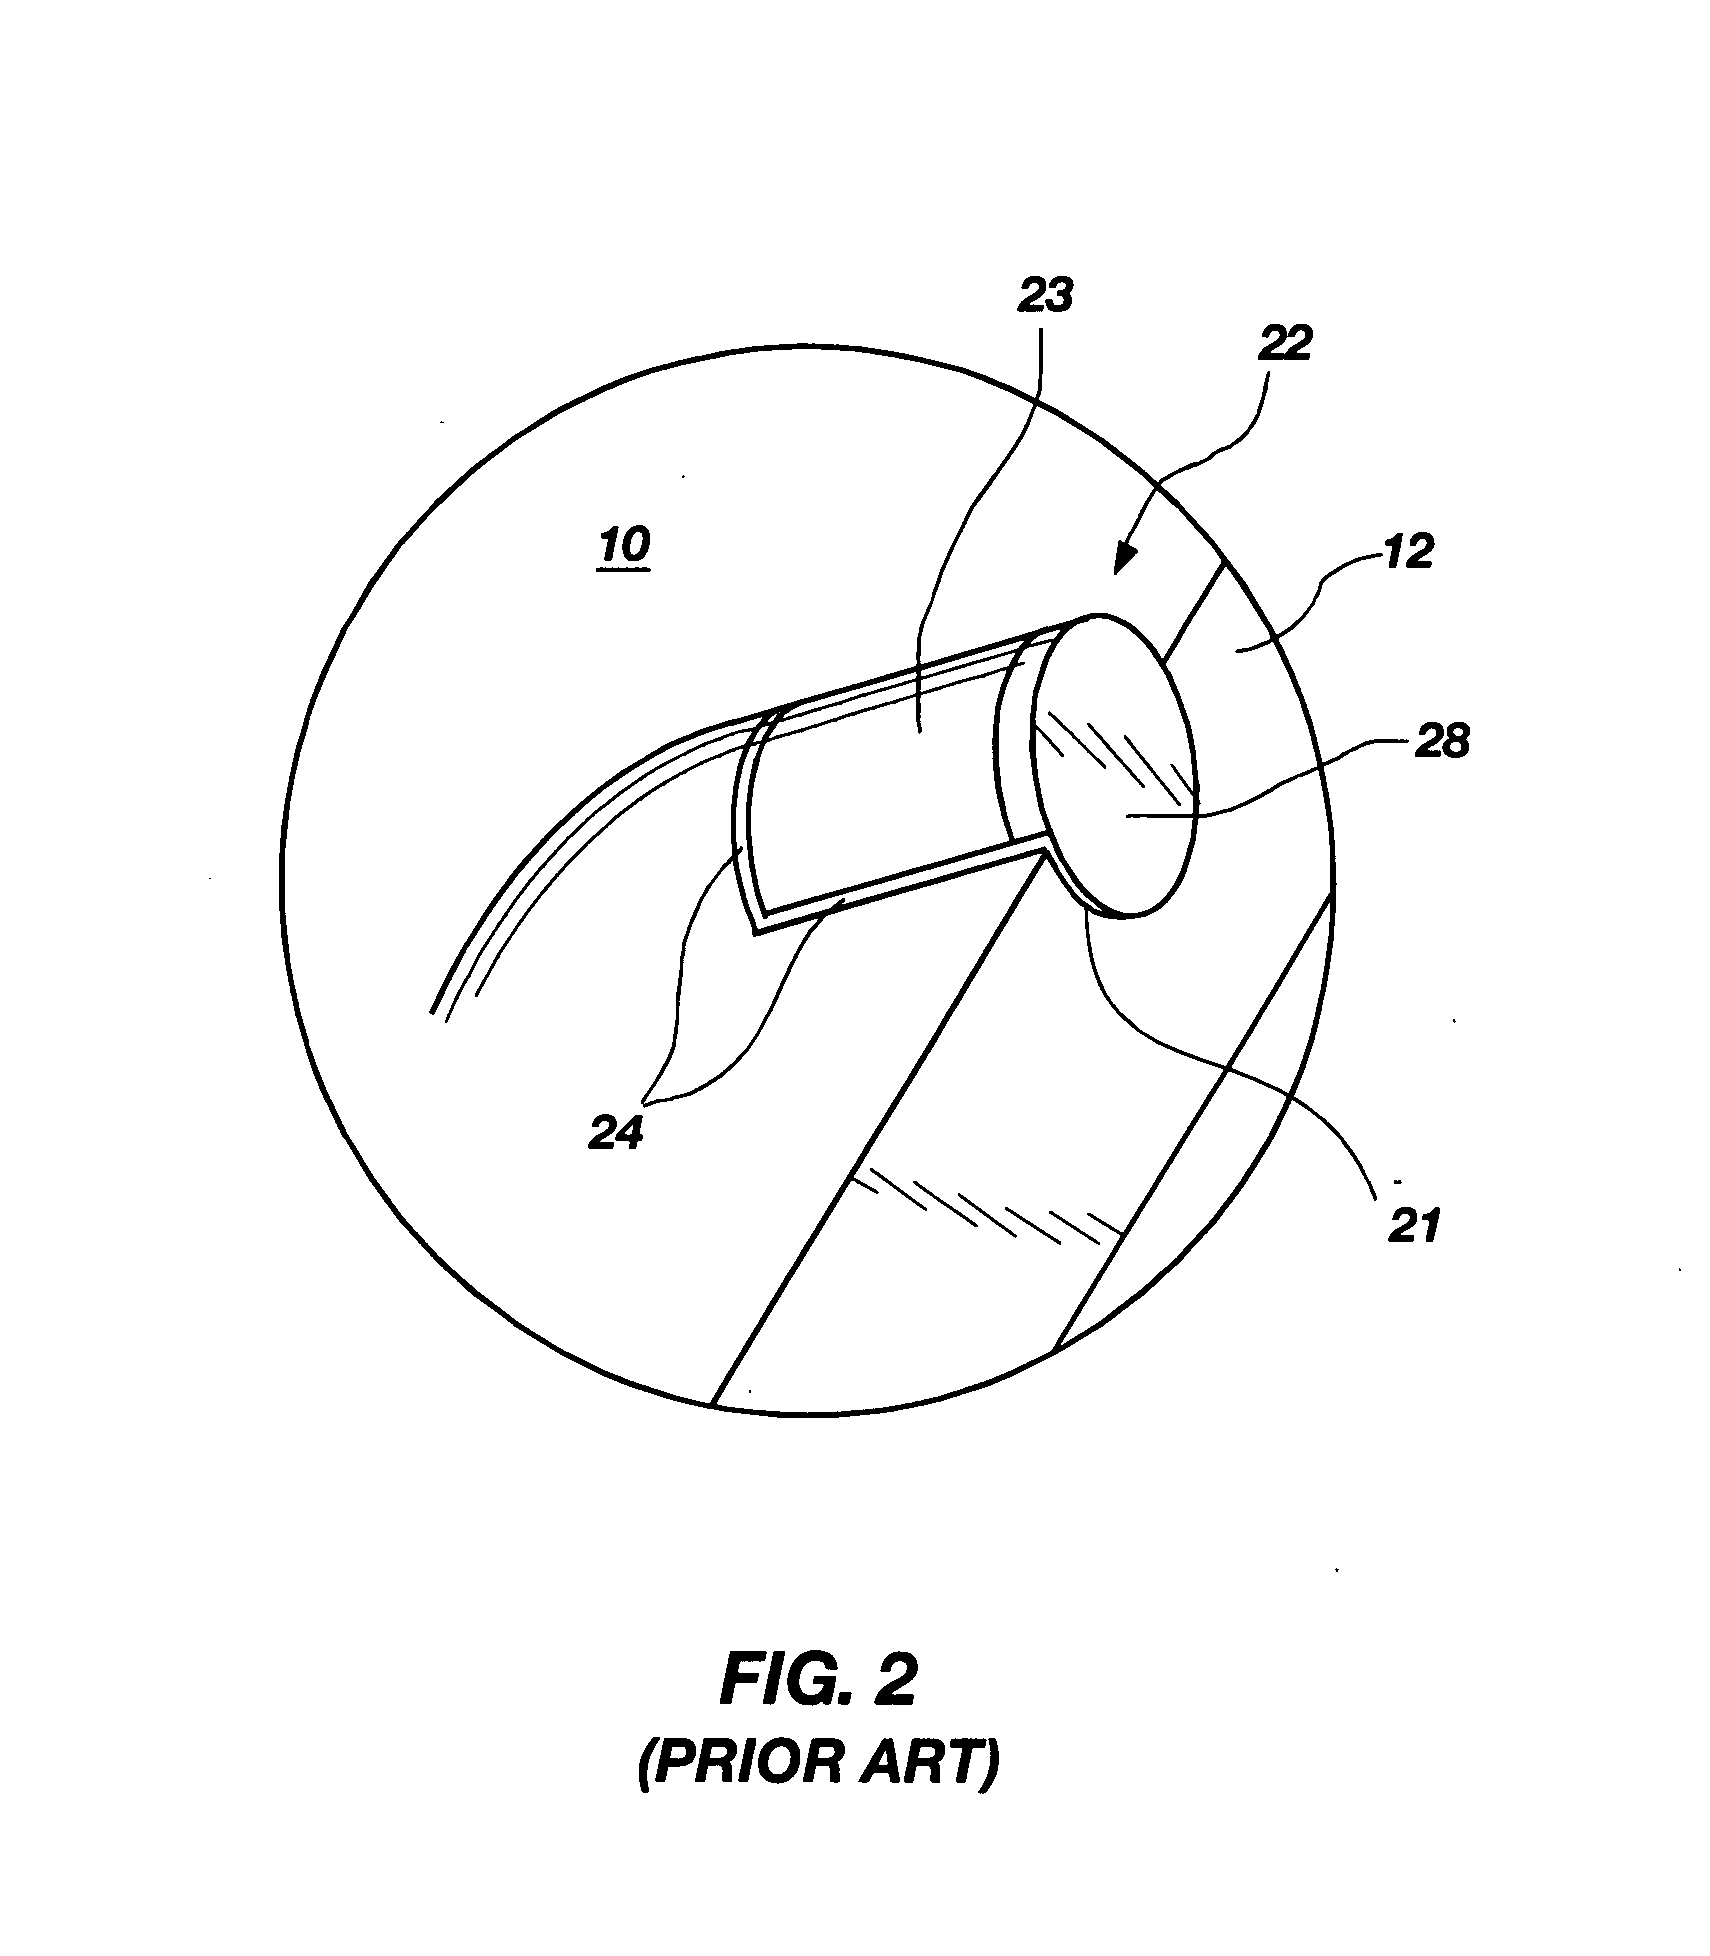 Particle-matrix composite drill bits with hardfacing and methods of manufacturing and repairing such drill bits using hardfacing materials